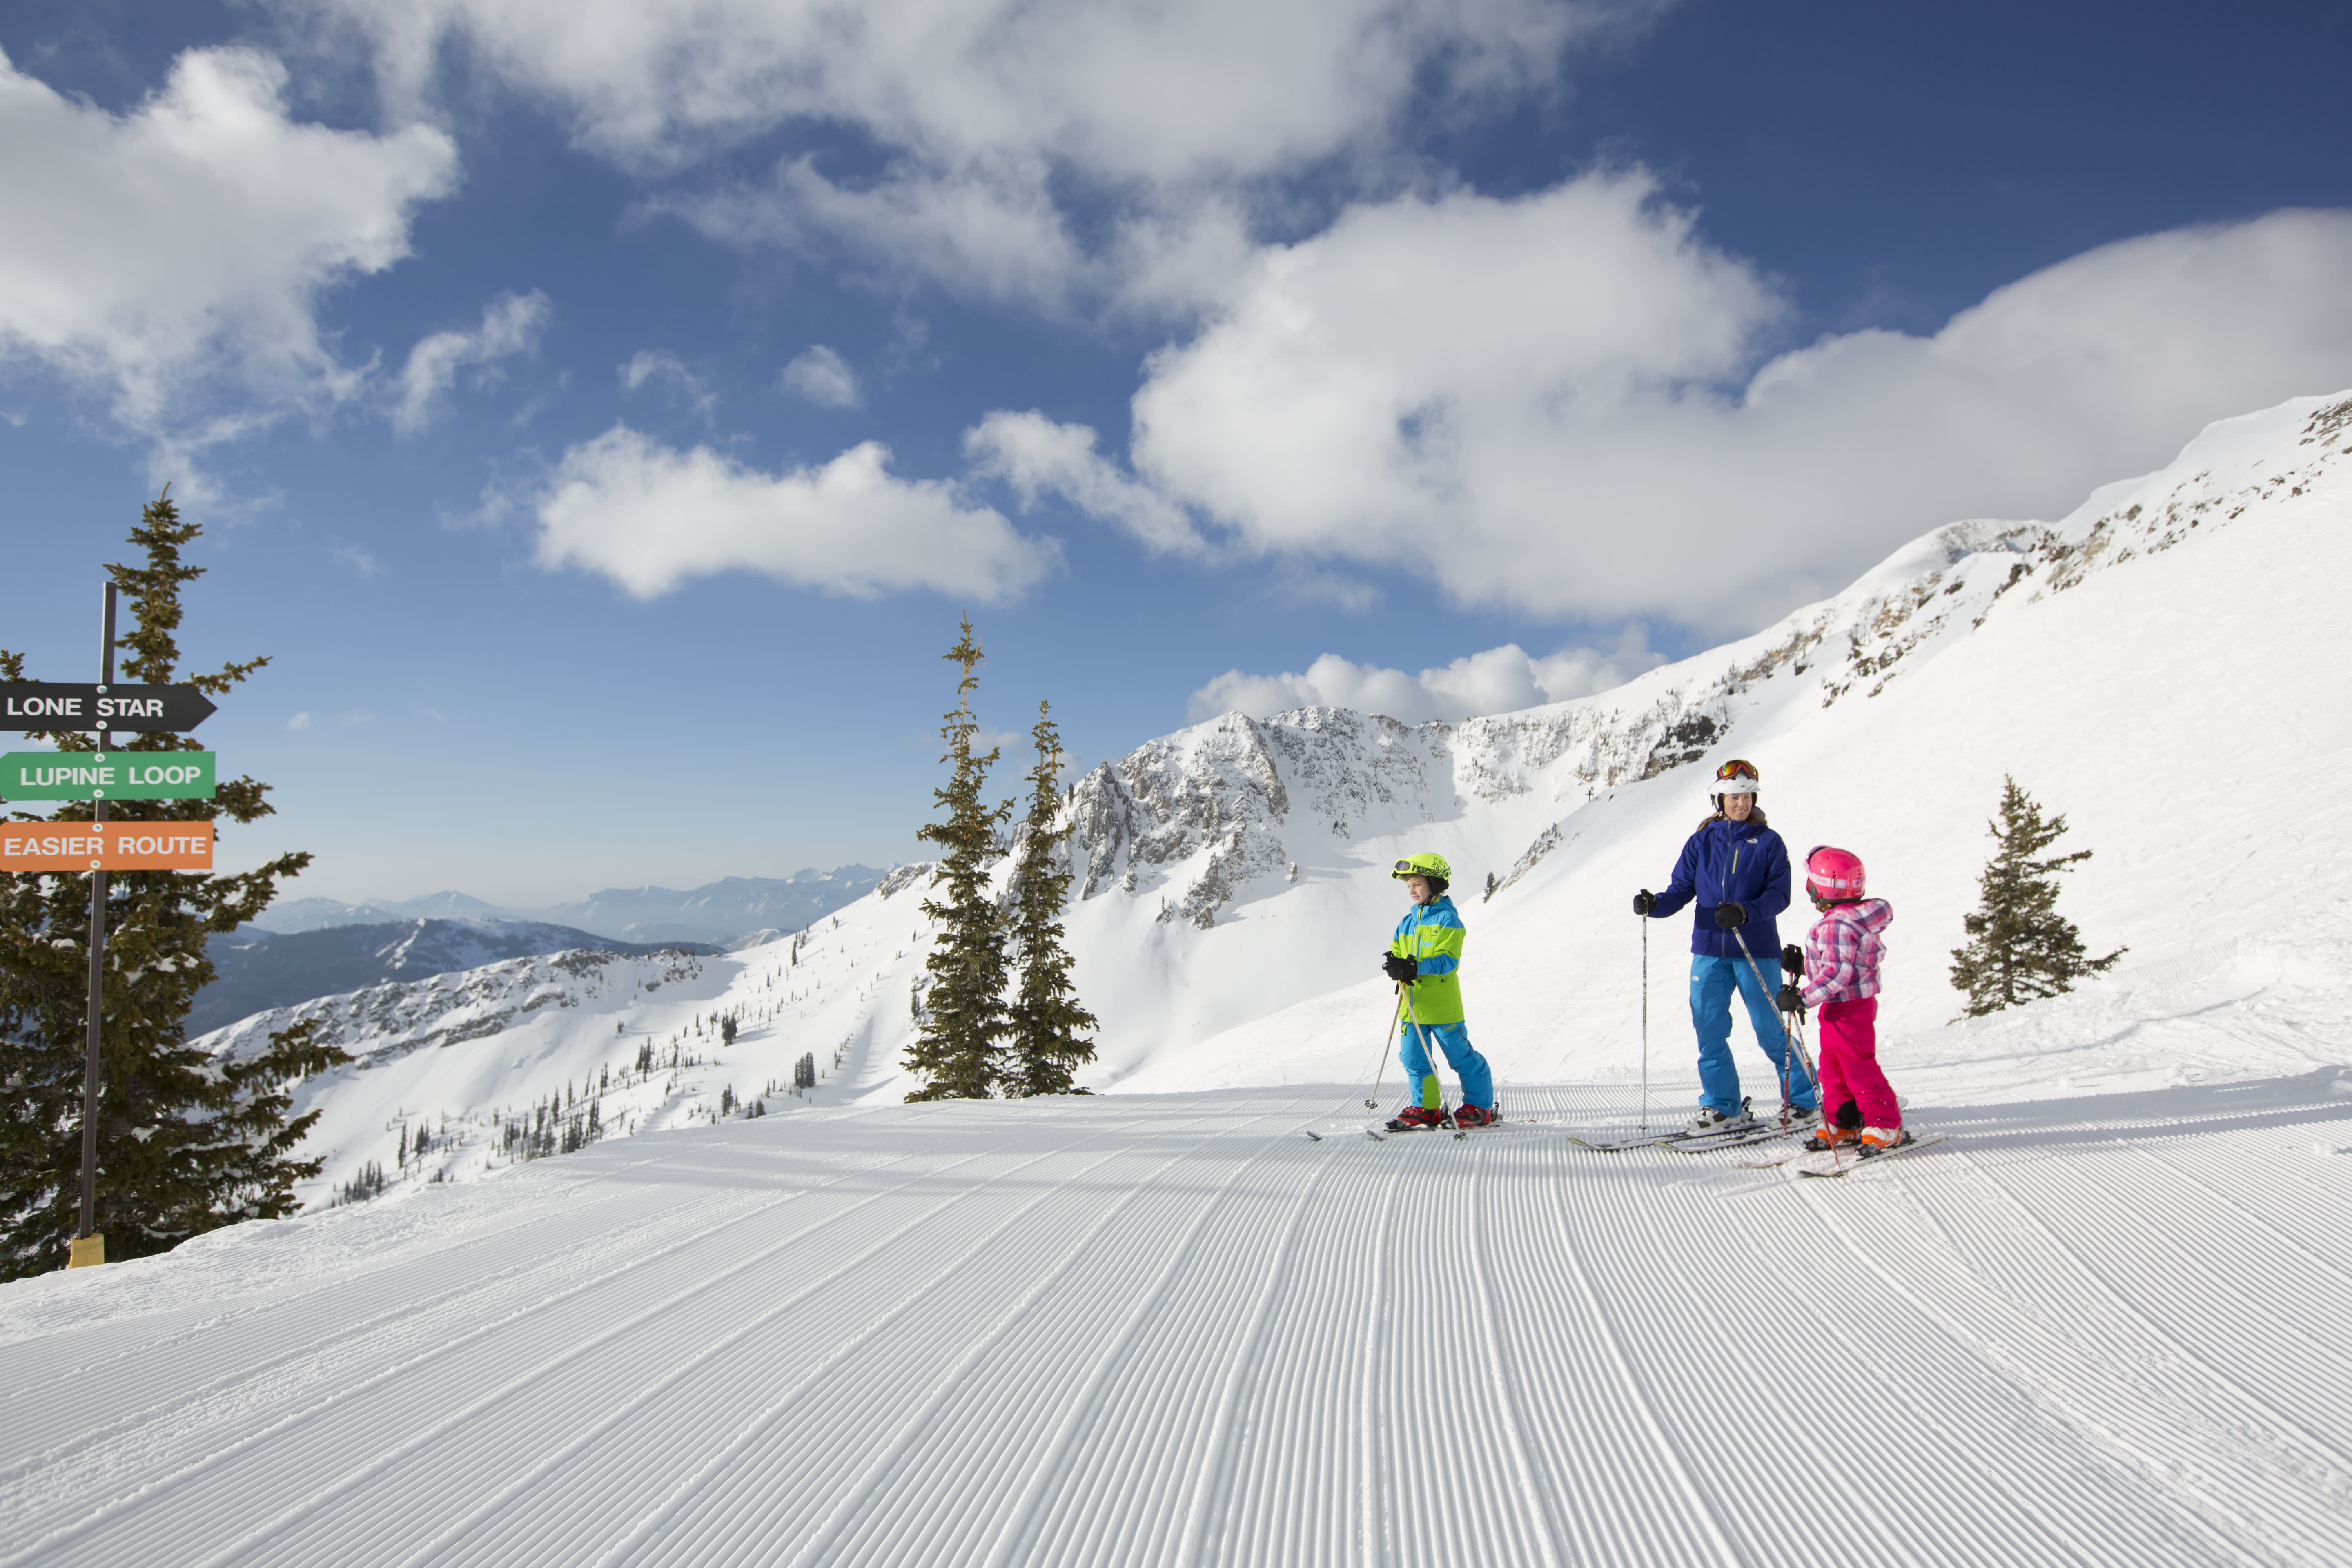 9 Tips for Planning a Ski Trip to Colorado